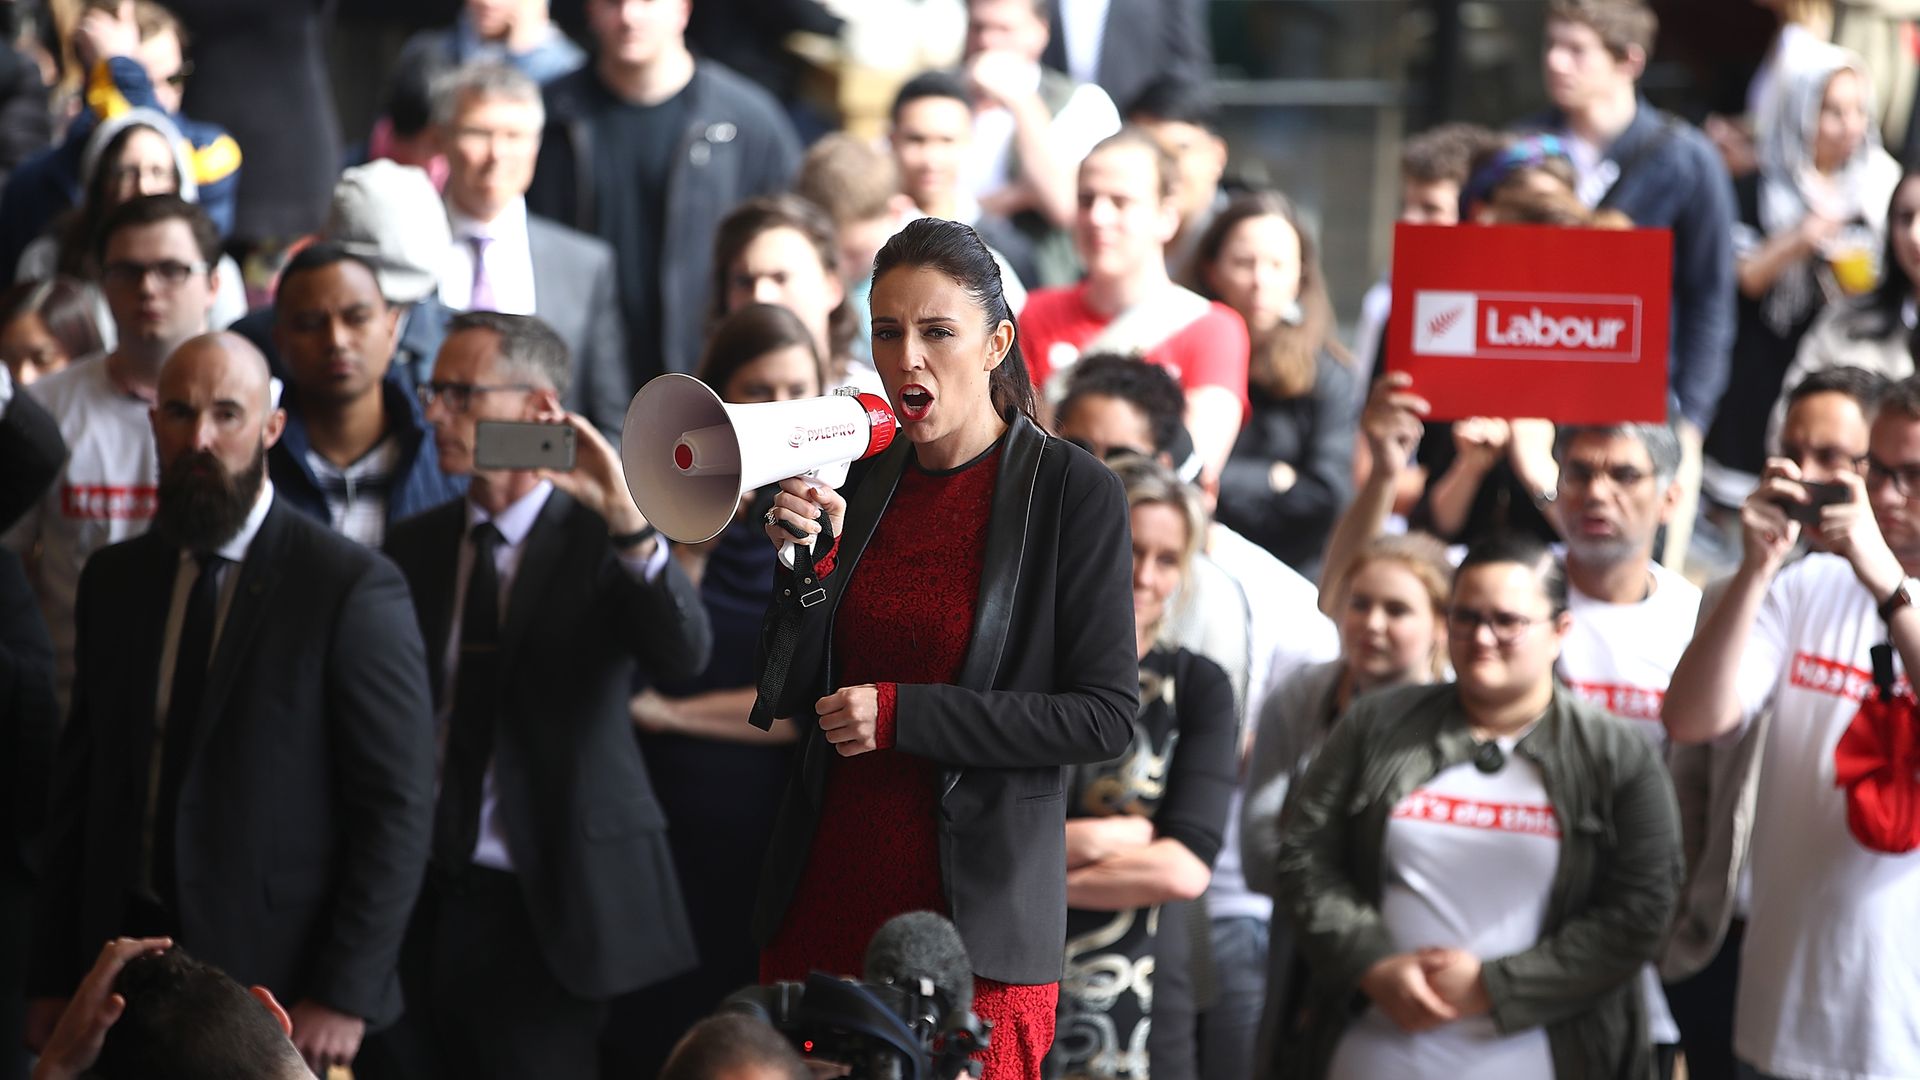 Jacinda Ardern on the campaign trail ahead of her victory in the New Zealand election in 2017, held under a form of proportional representation - Credit: Getty Images